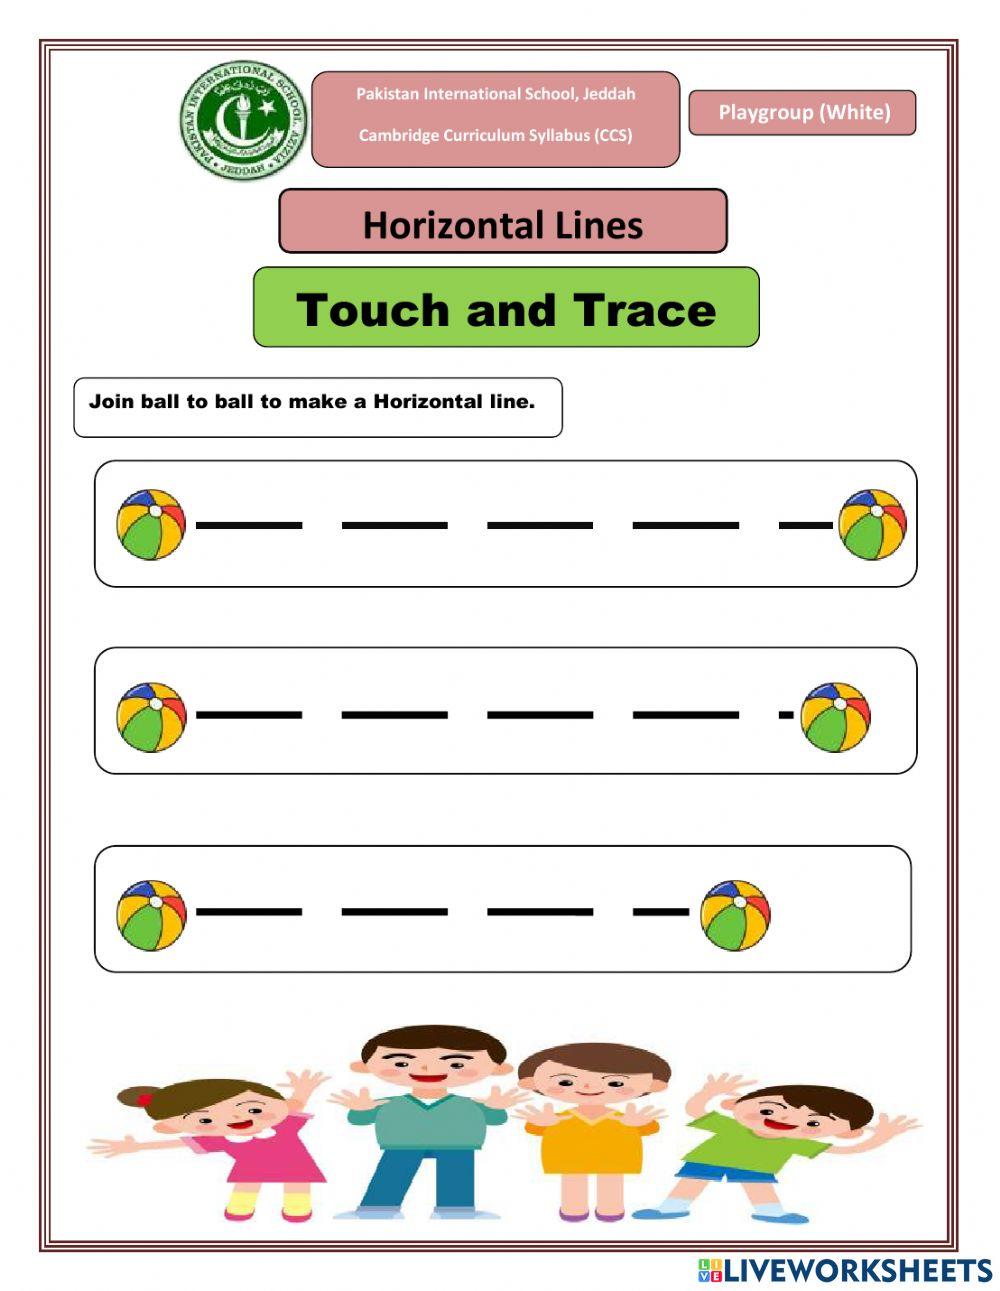 Touch and Trace horizontal line